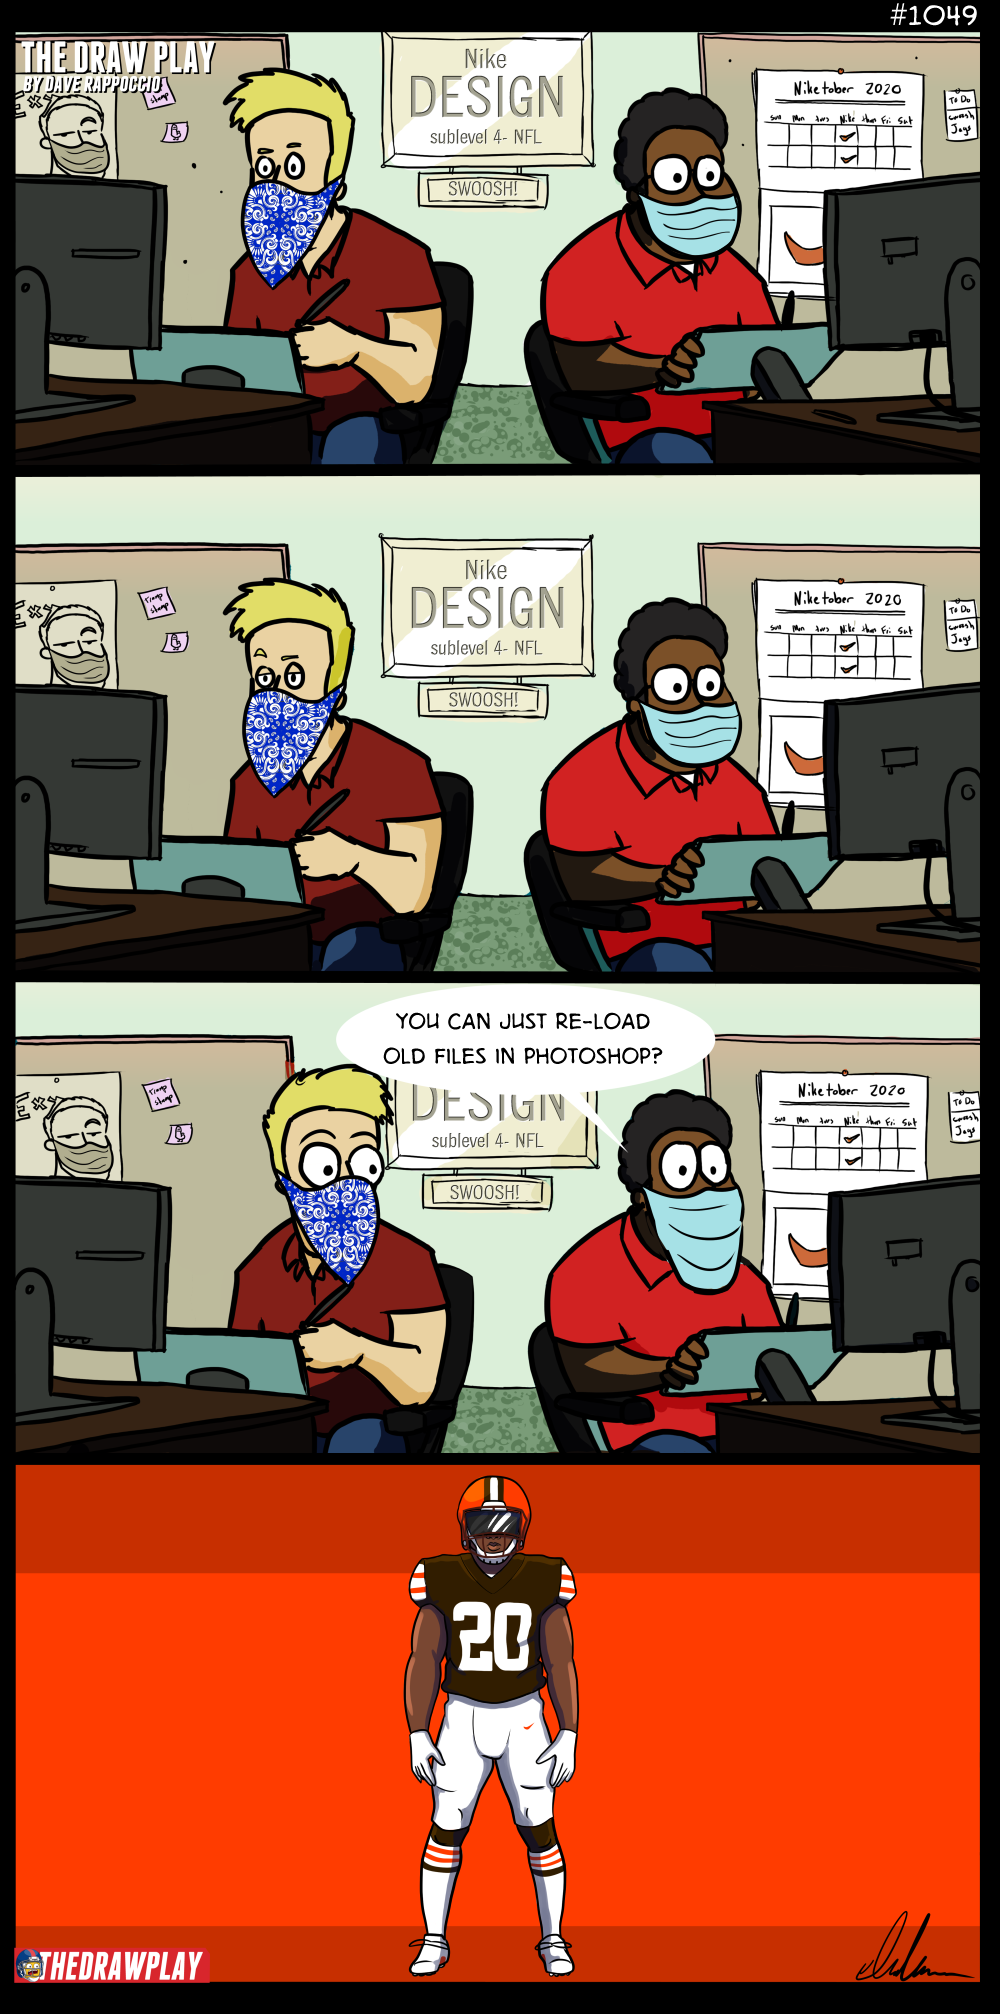 Next comic: the designers get laid off due to covid 19